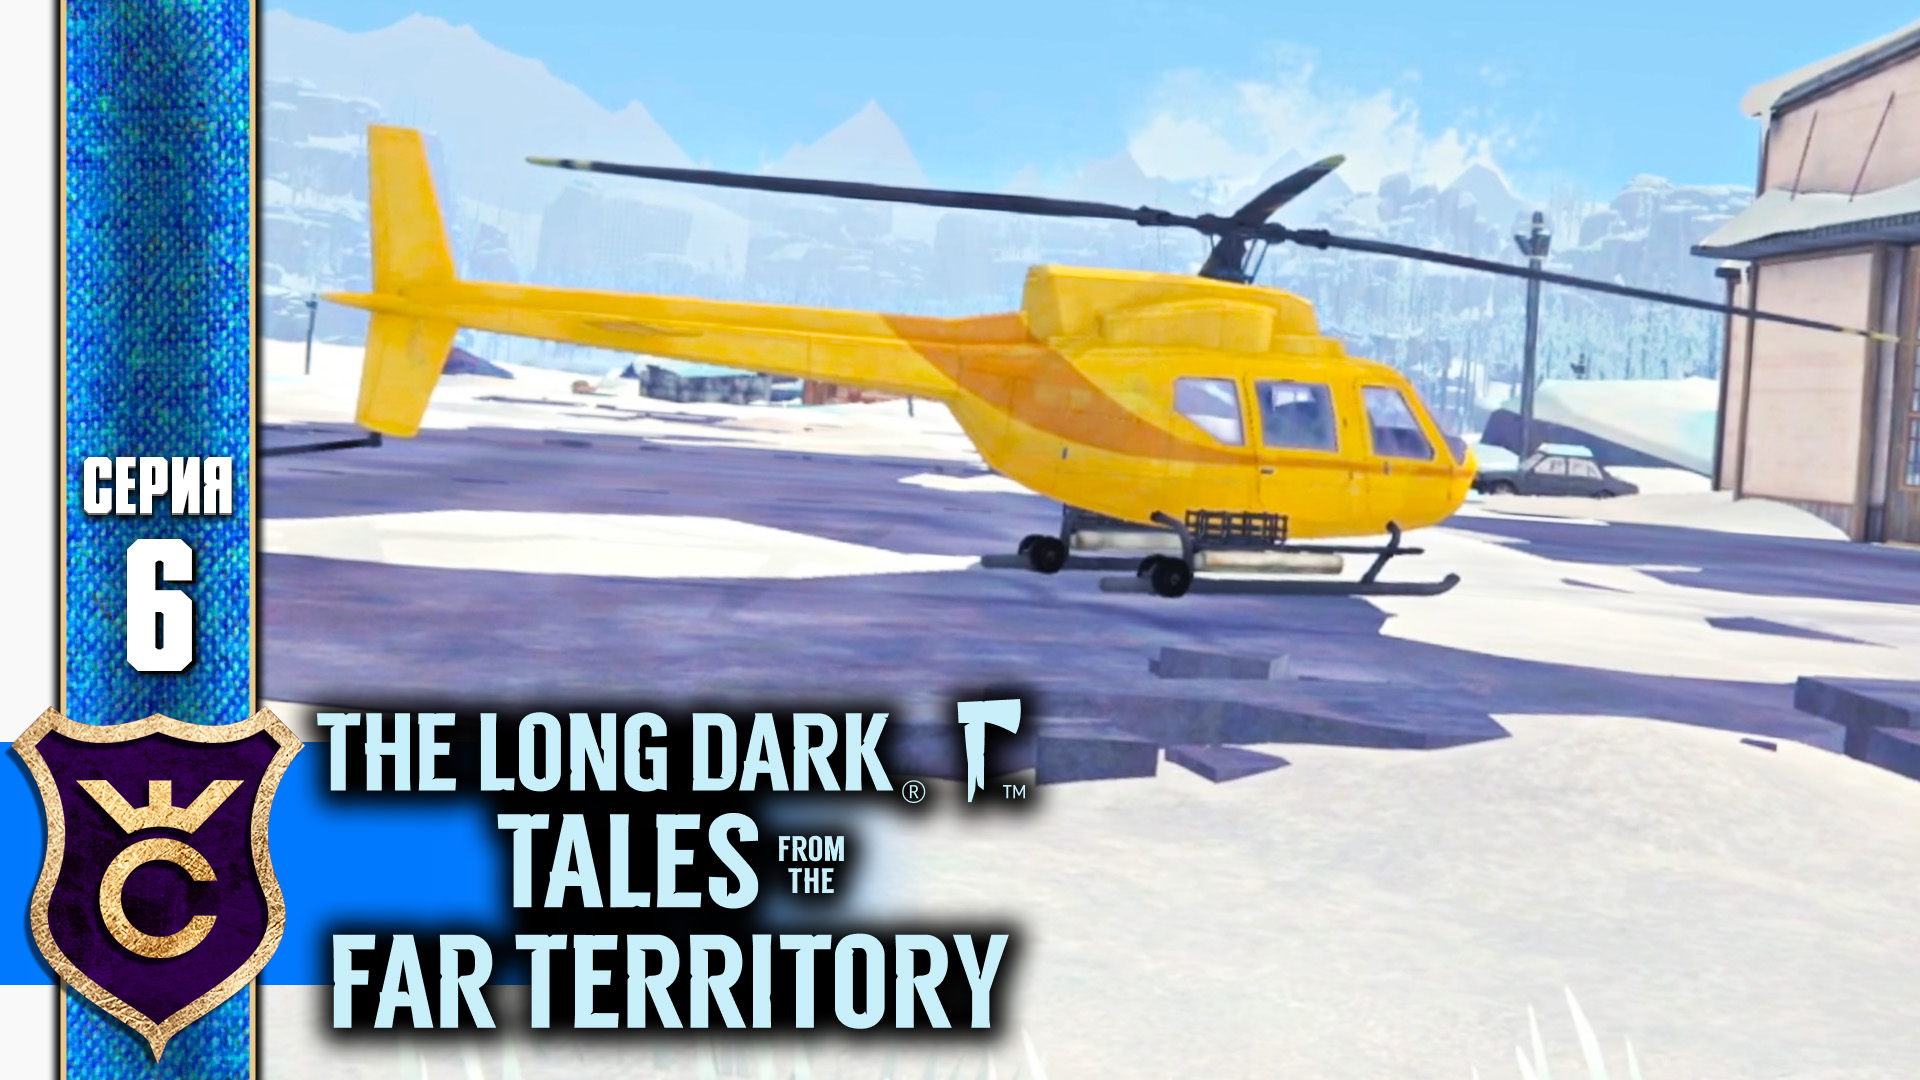 Tales from the far territory. The long Dark Tales from the far Territory карта. The long Dark вертолет. Tales from far Territory большой вертолет. The long Dark: Tales from the far Territory карта локаций.